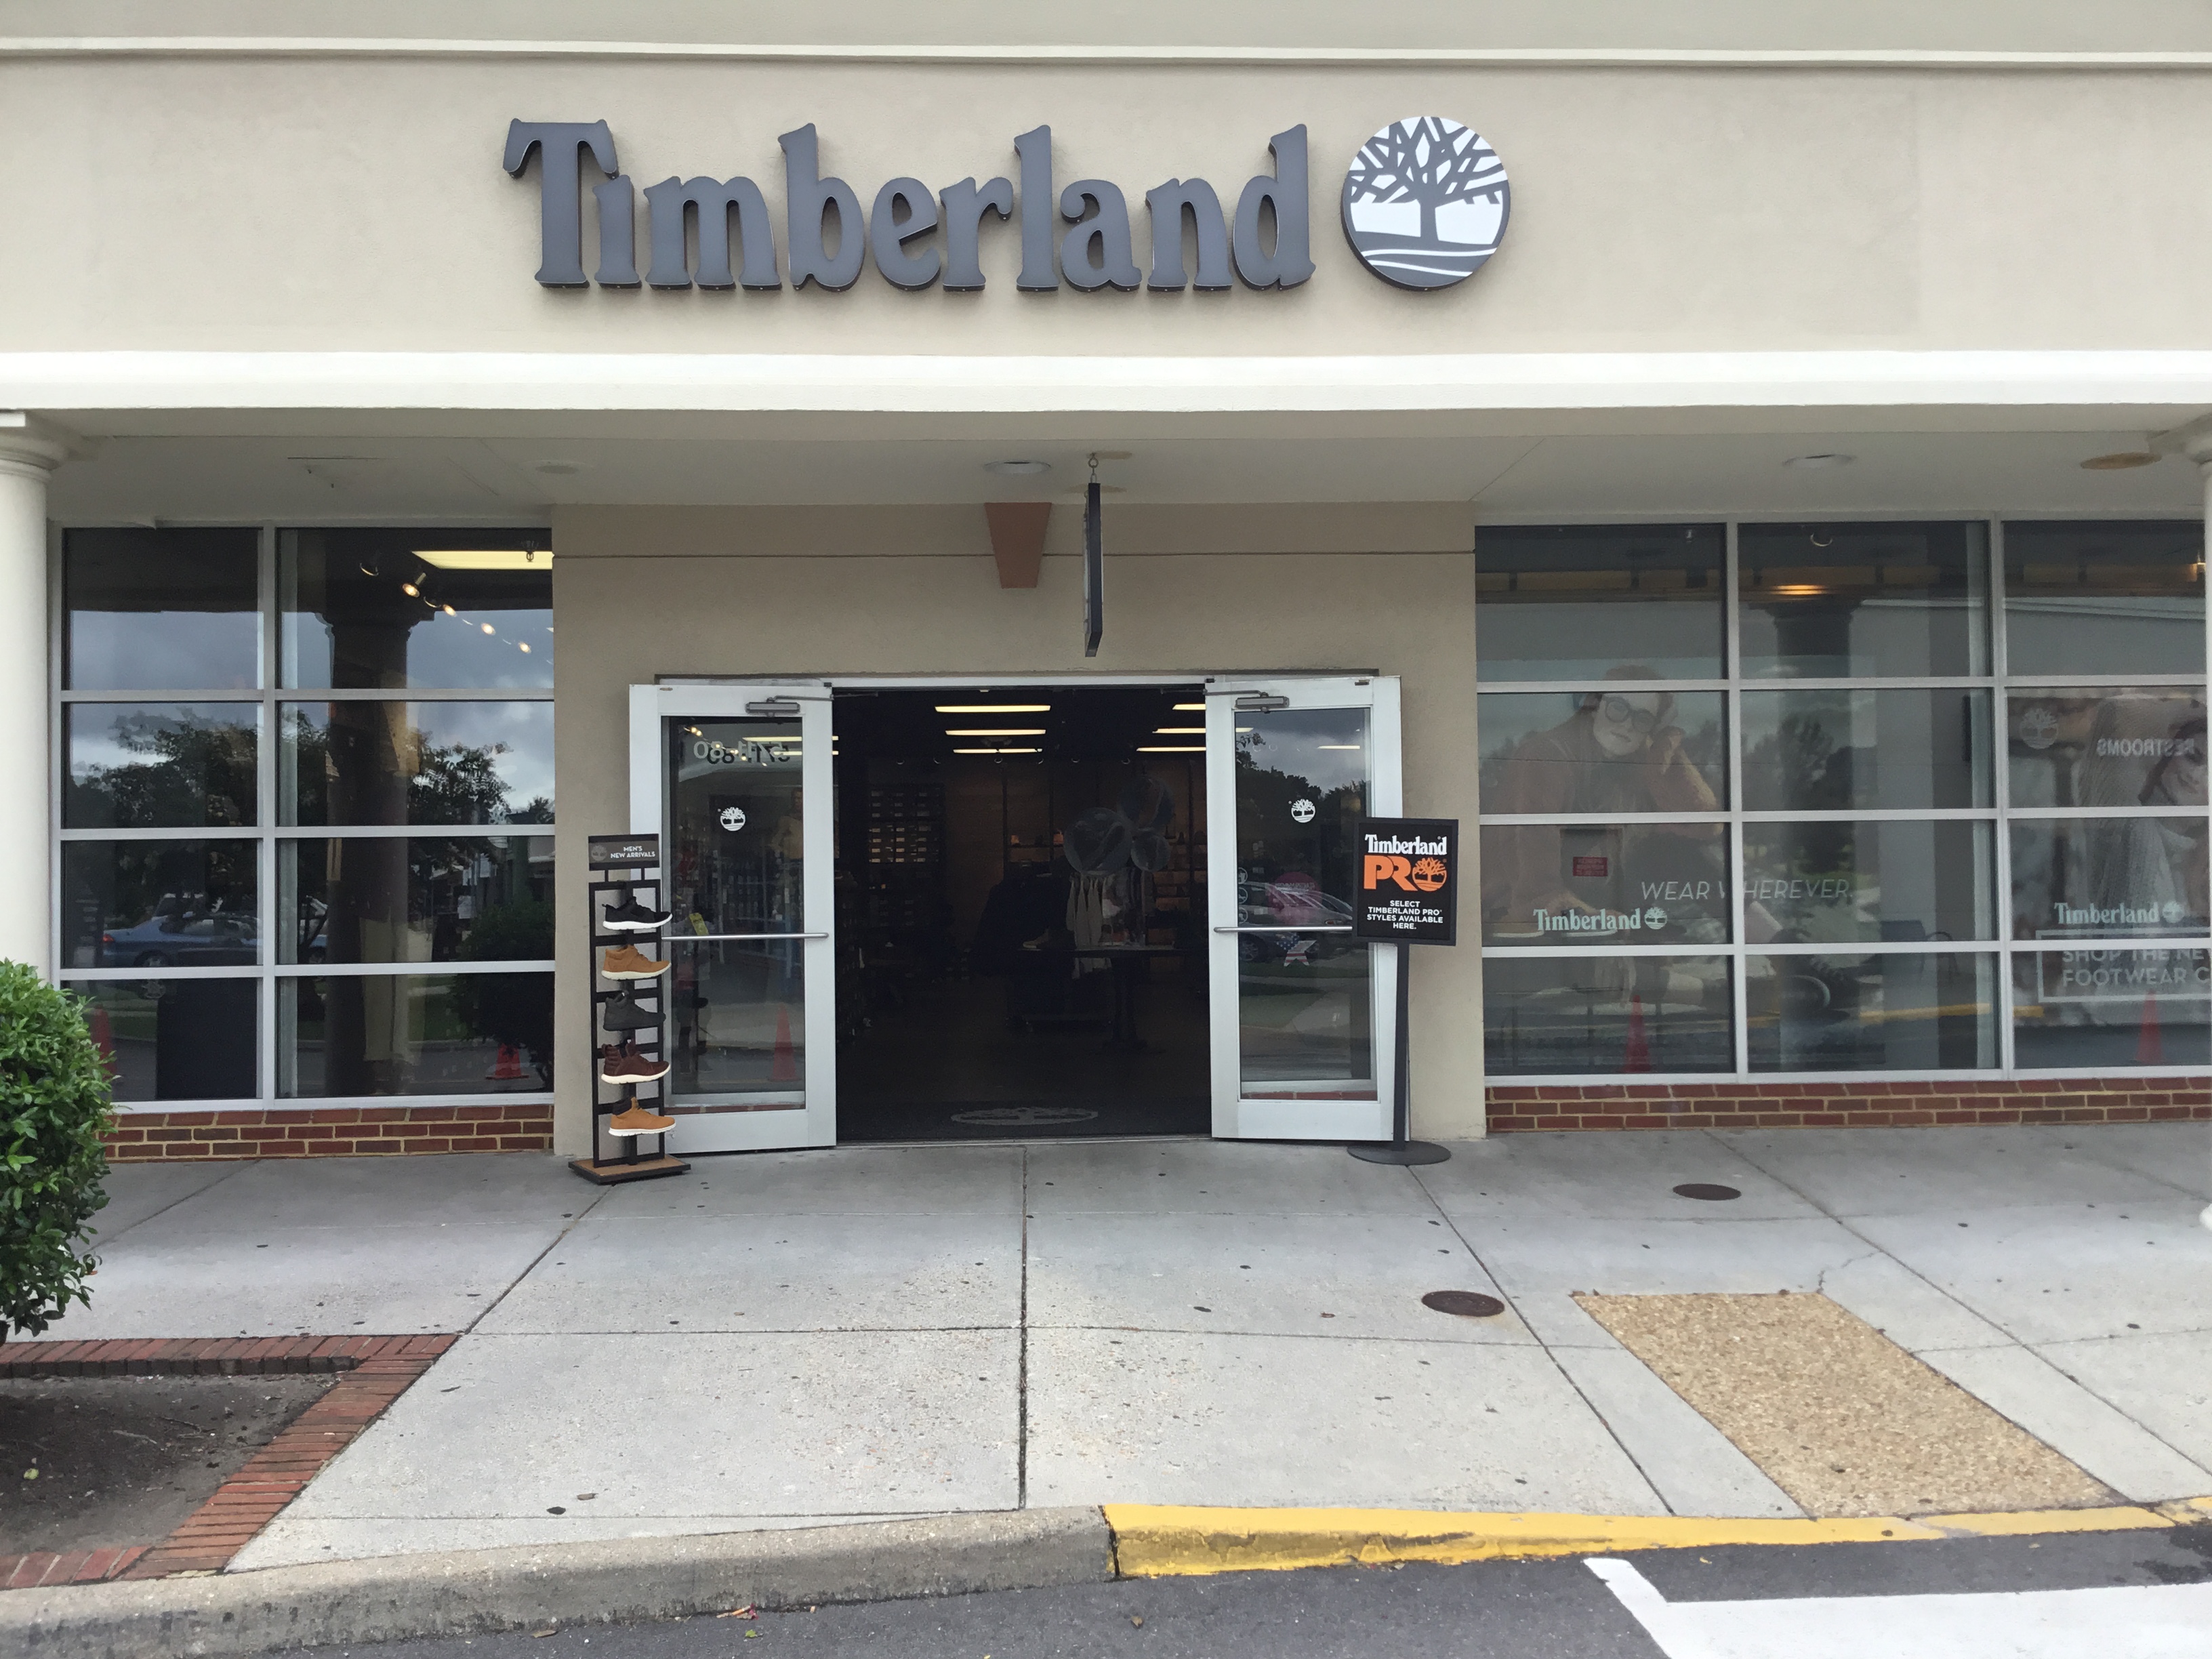 asignar acidez Contento Timberland - Boots, Shoes, Clothing & Accessories in Williamsburg, VA